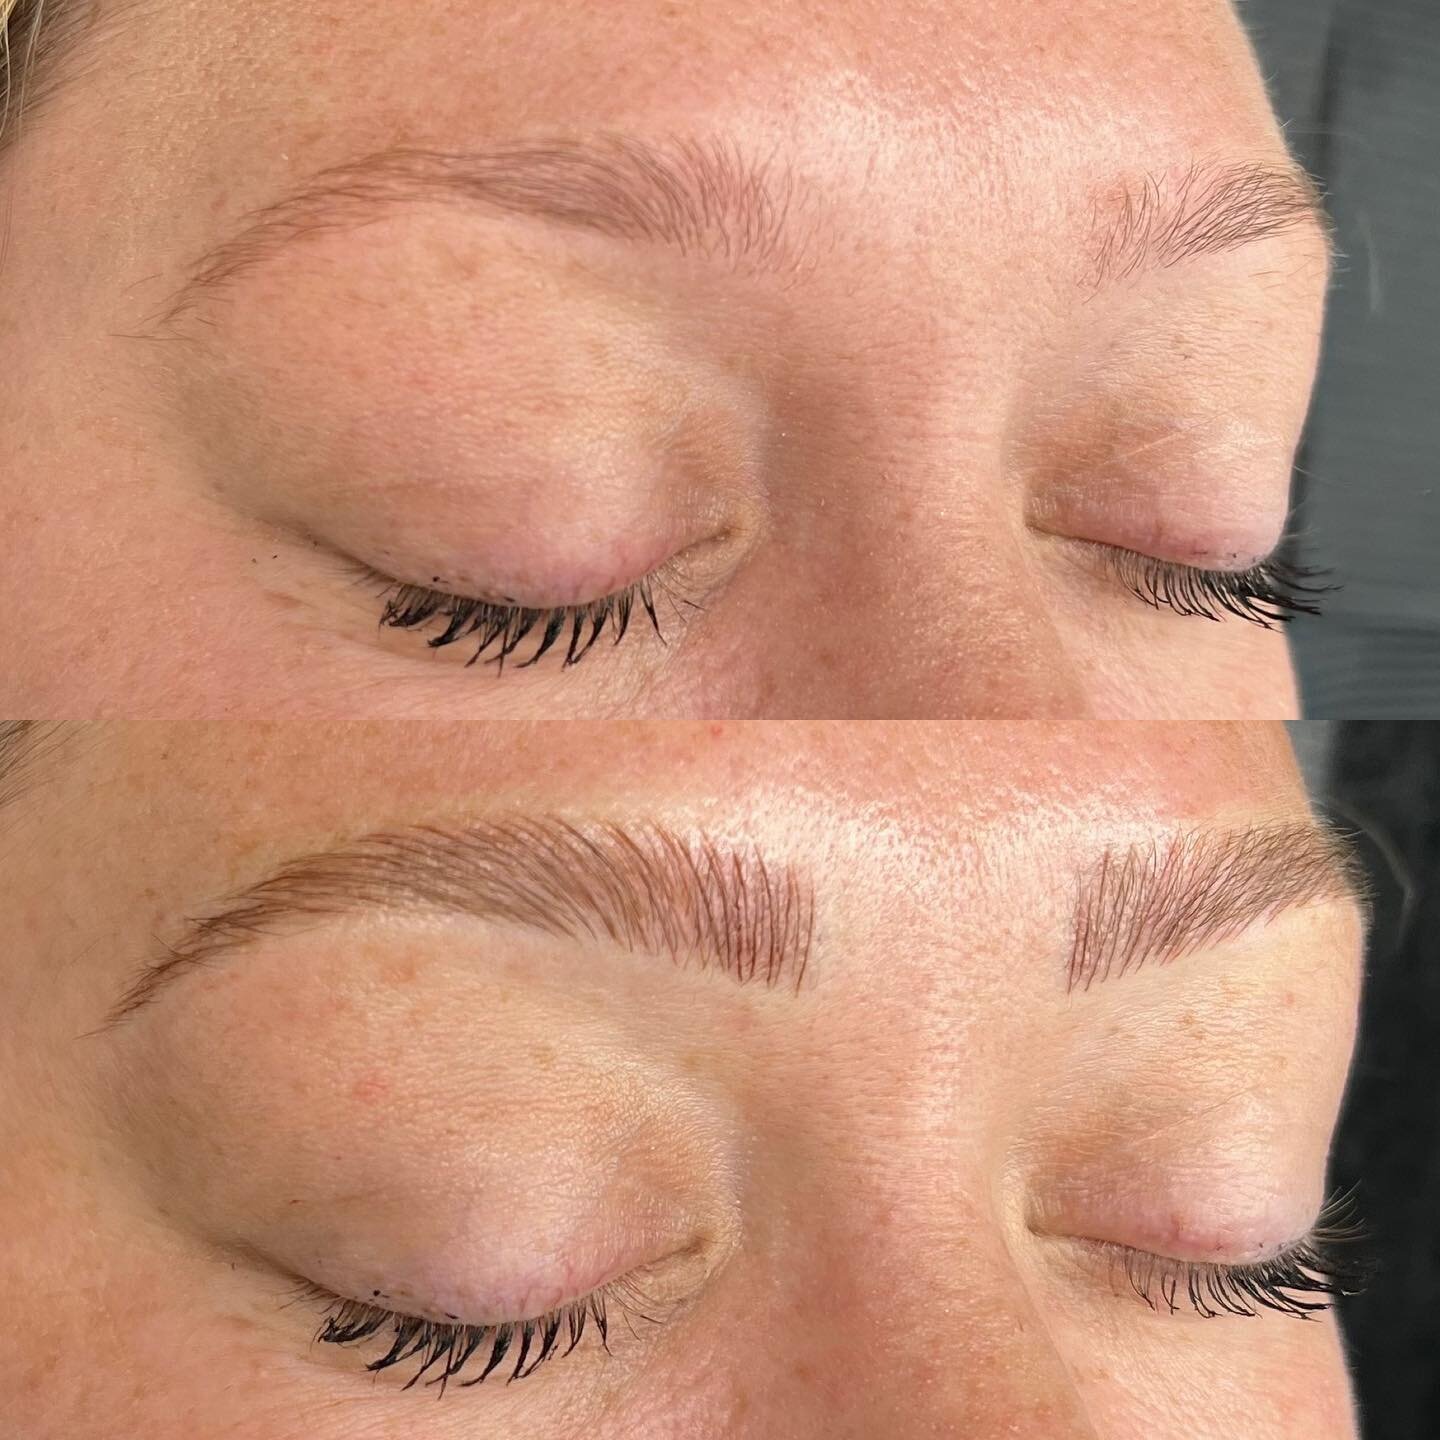 Get vacation-ready brows with microblading! ☀️

Dreaming of flawless, low-maintenance brows for your upcoming summer getaway? Look no further! Microblading is the secret to achieving the perfect brows that stay put, no matter where your adventures ta